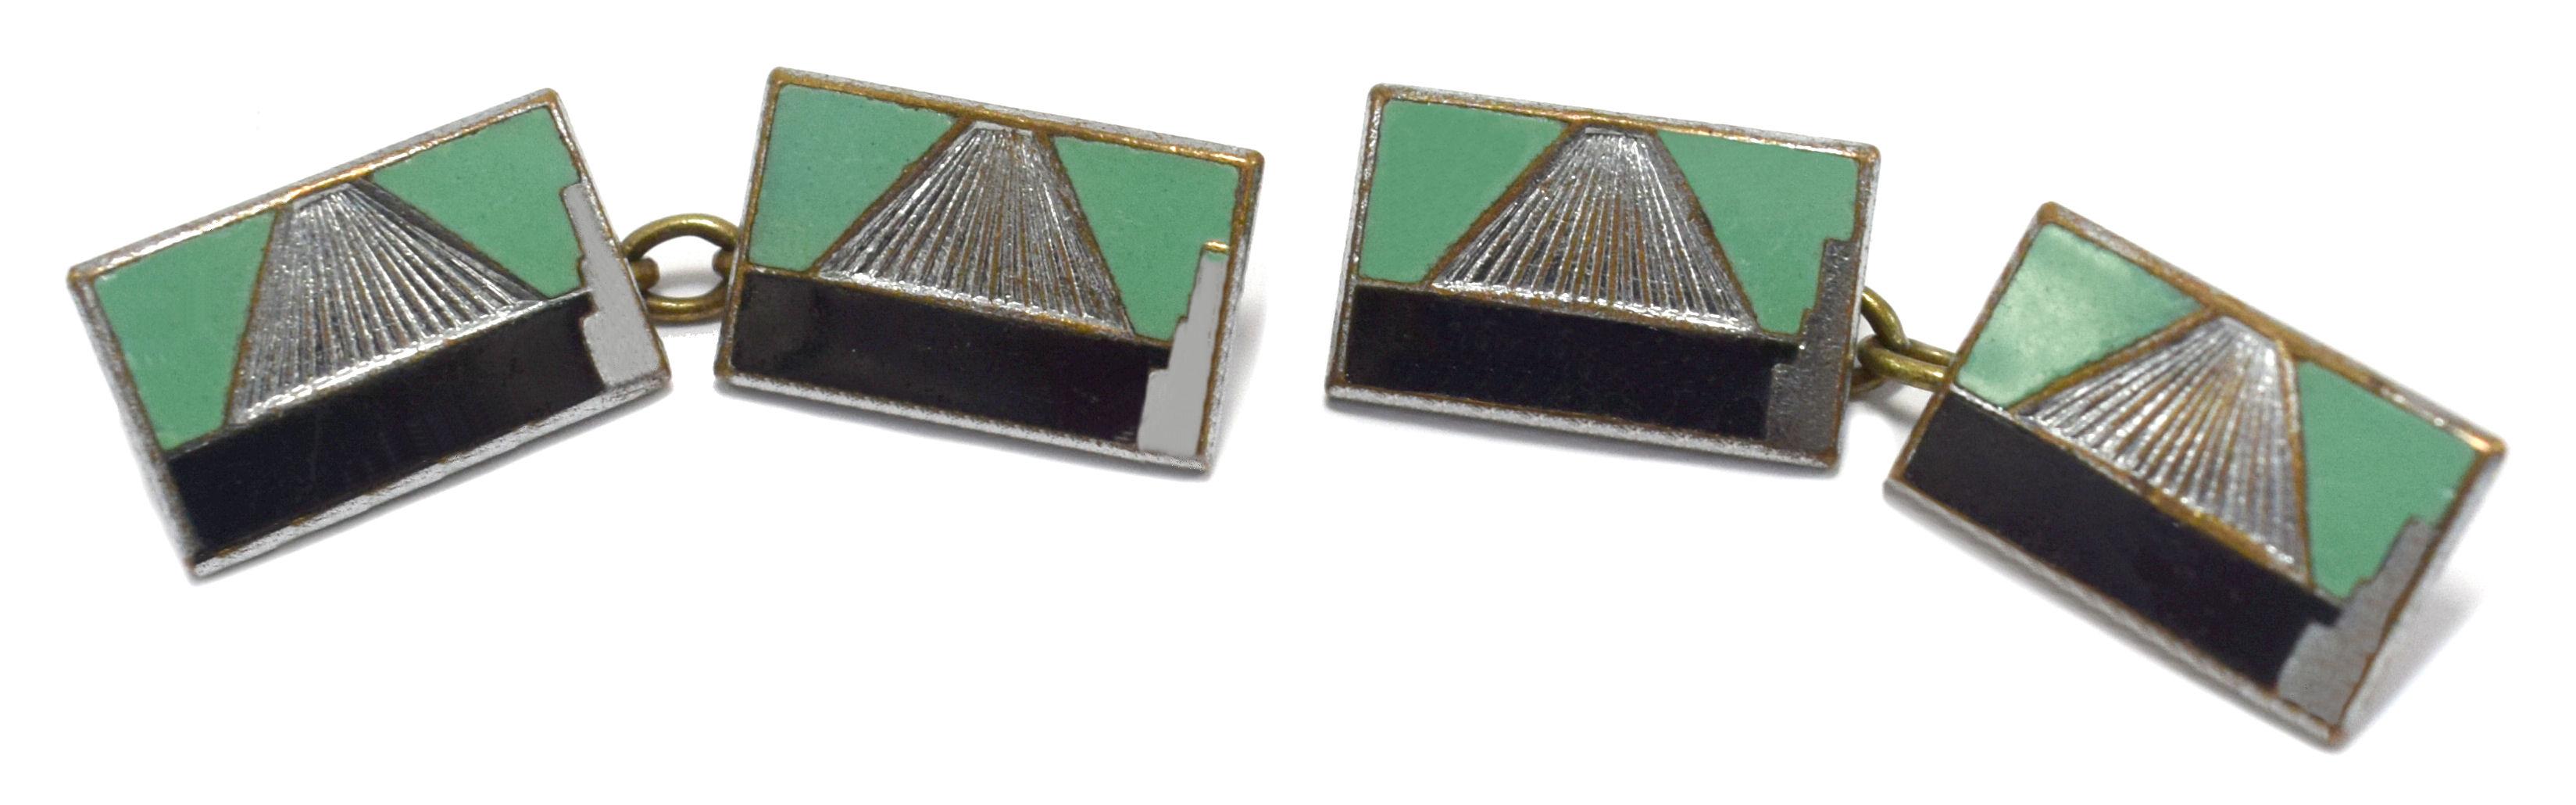 Extremely stylish and totally original are these matching pair of English Art Deco modernist enamel cufflinks dating to the 1930's. Fabulous geometric patterning and colour, with a slight modernist feel. Certainly can't be confused with any other